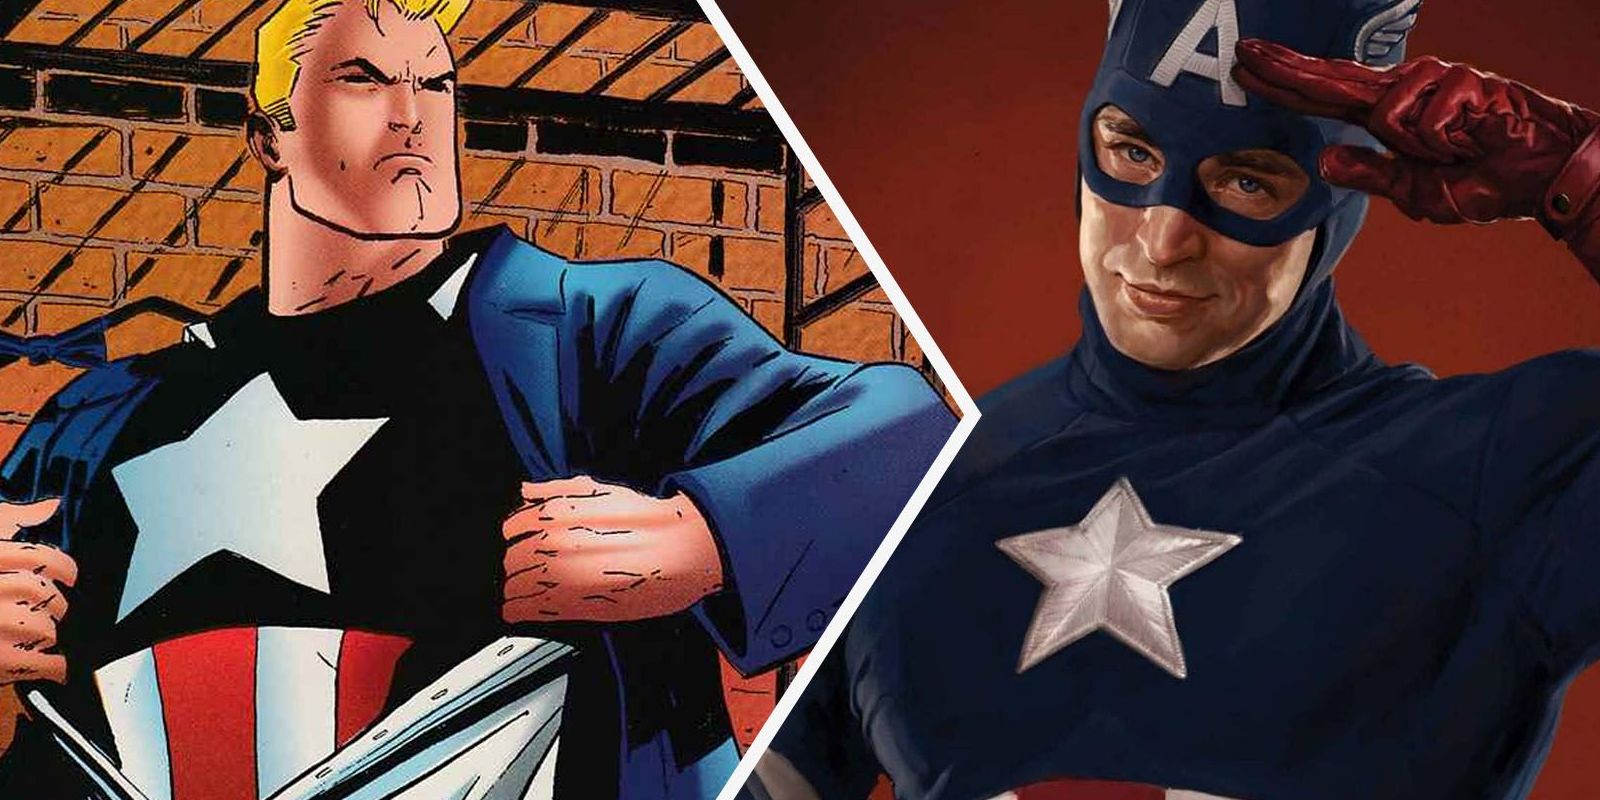 Left shows Steve Rogers unveiling his Captain America suit in the comics, right shows Chris Evans as the classic MCU Captain America